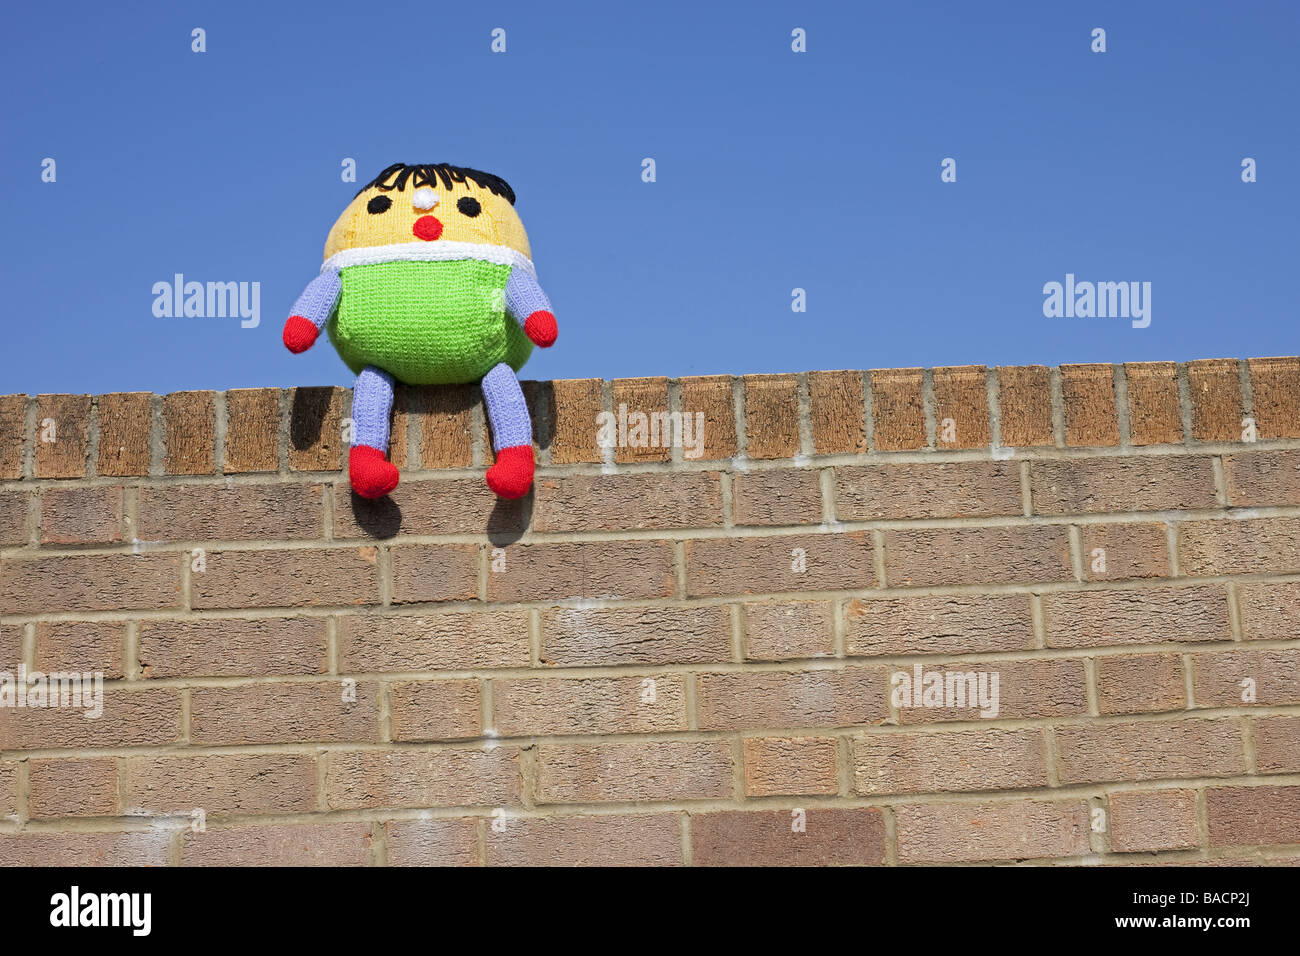 A Humpty Dumpty soft toy  sat on the wall with a blue sky background. Stock Photo